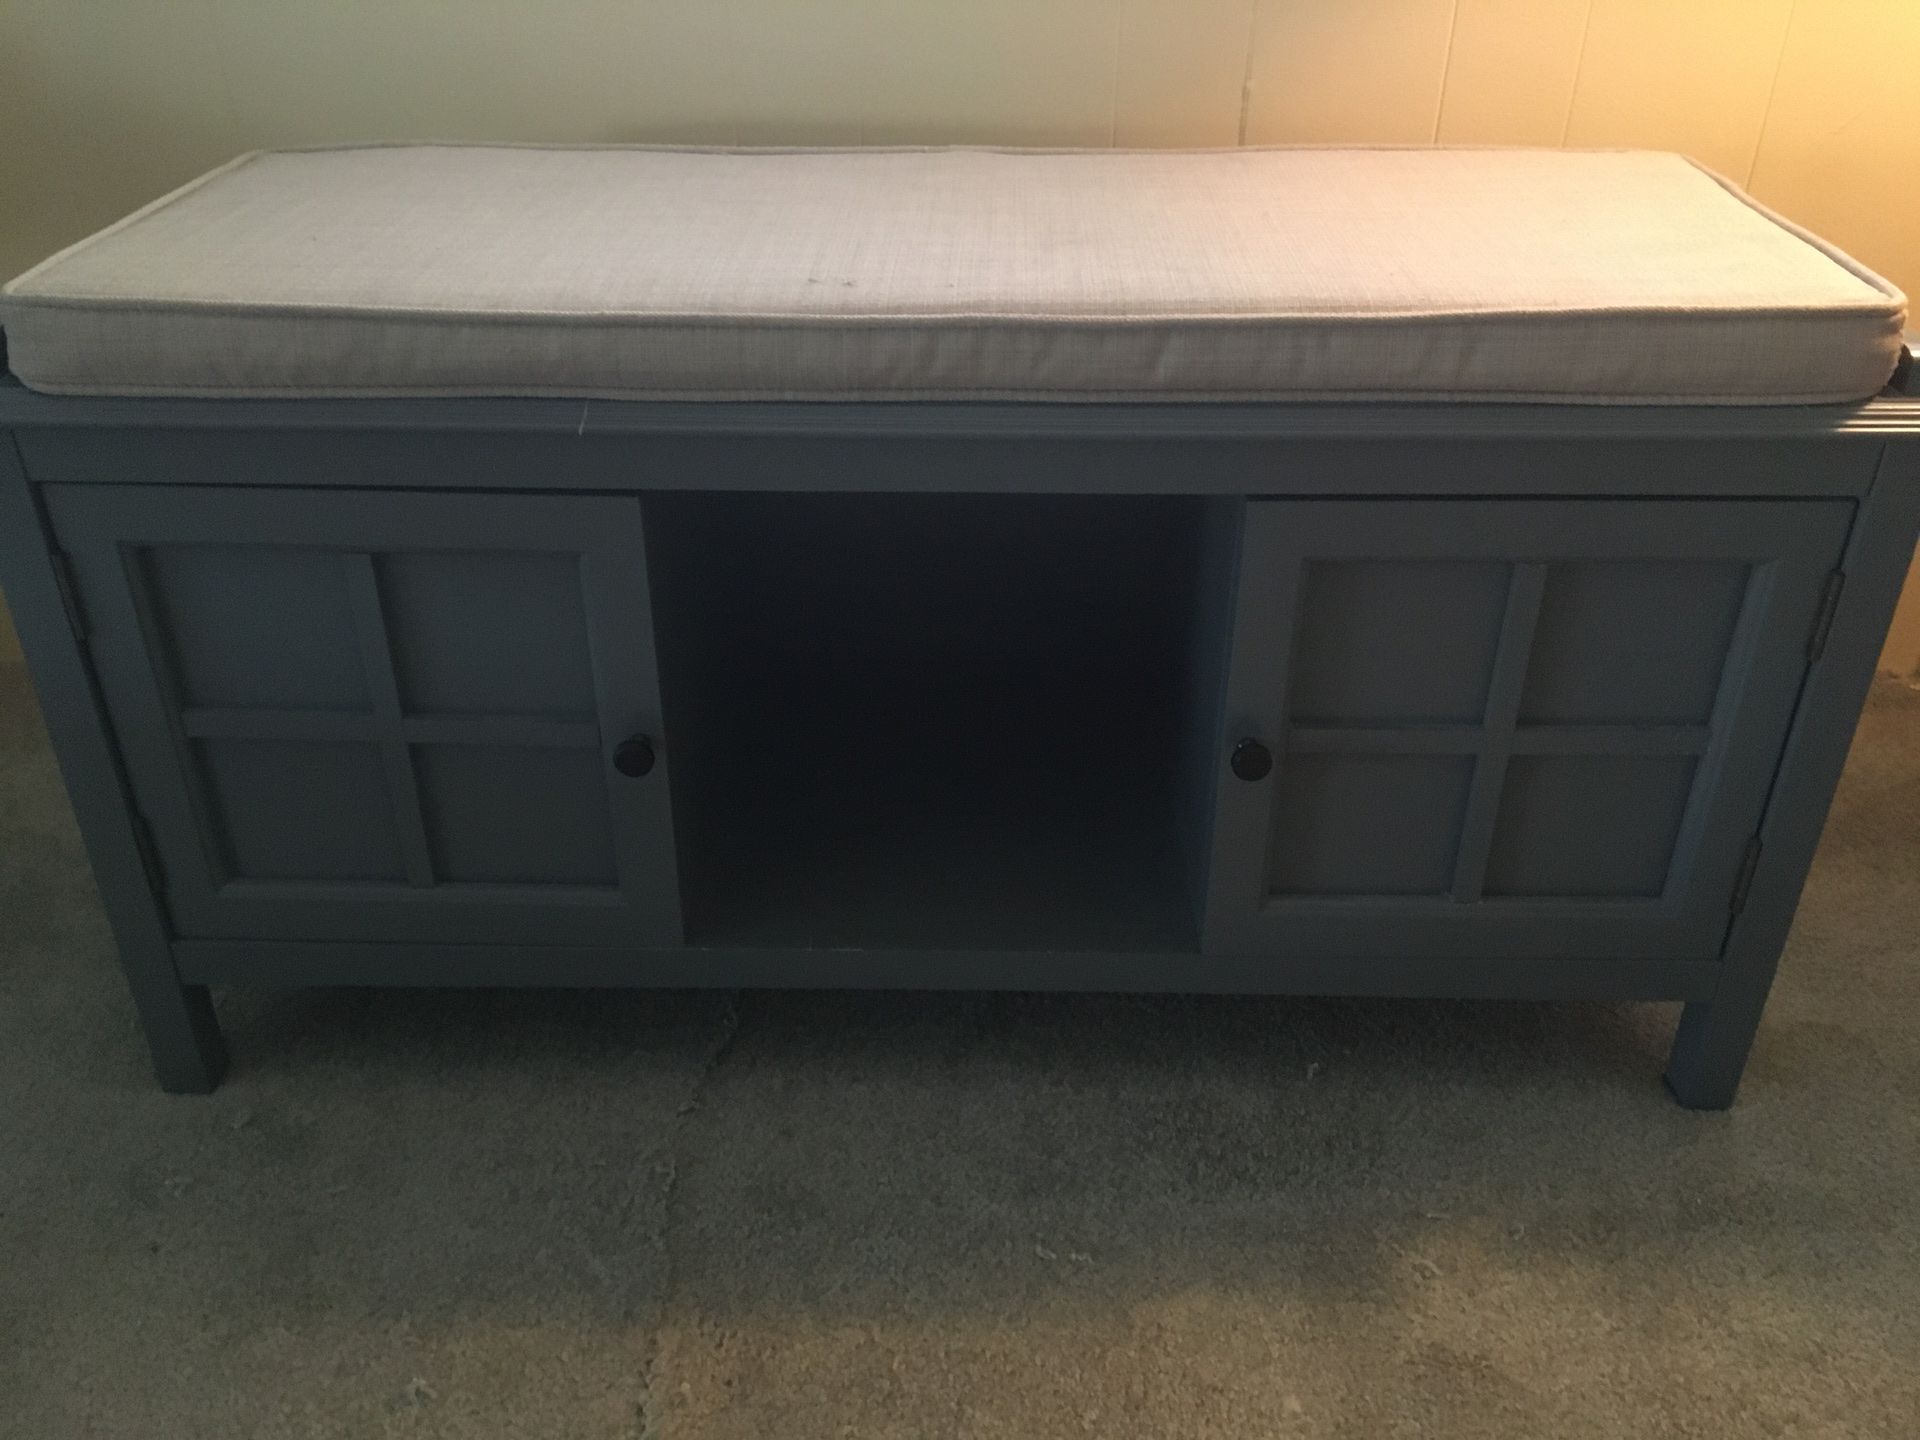 Furniture storage , great condition, $45 firm 19 inch height, 16 inch depth, 42 inch length